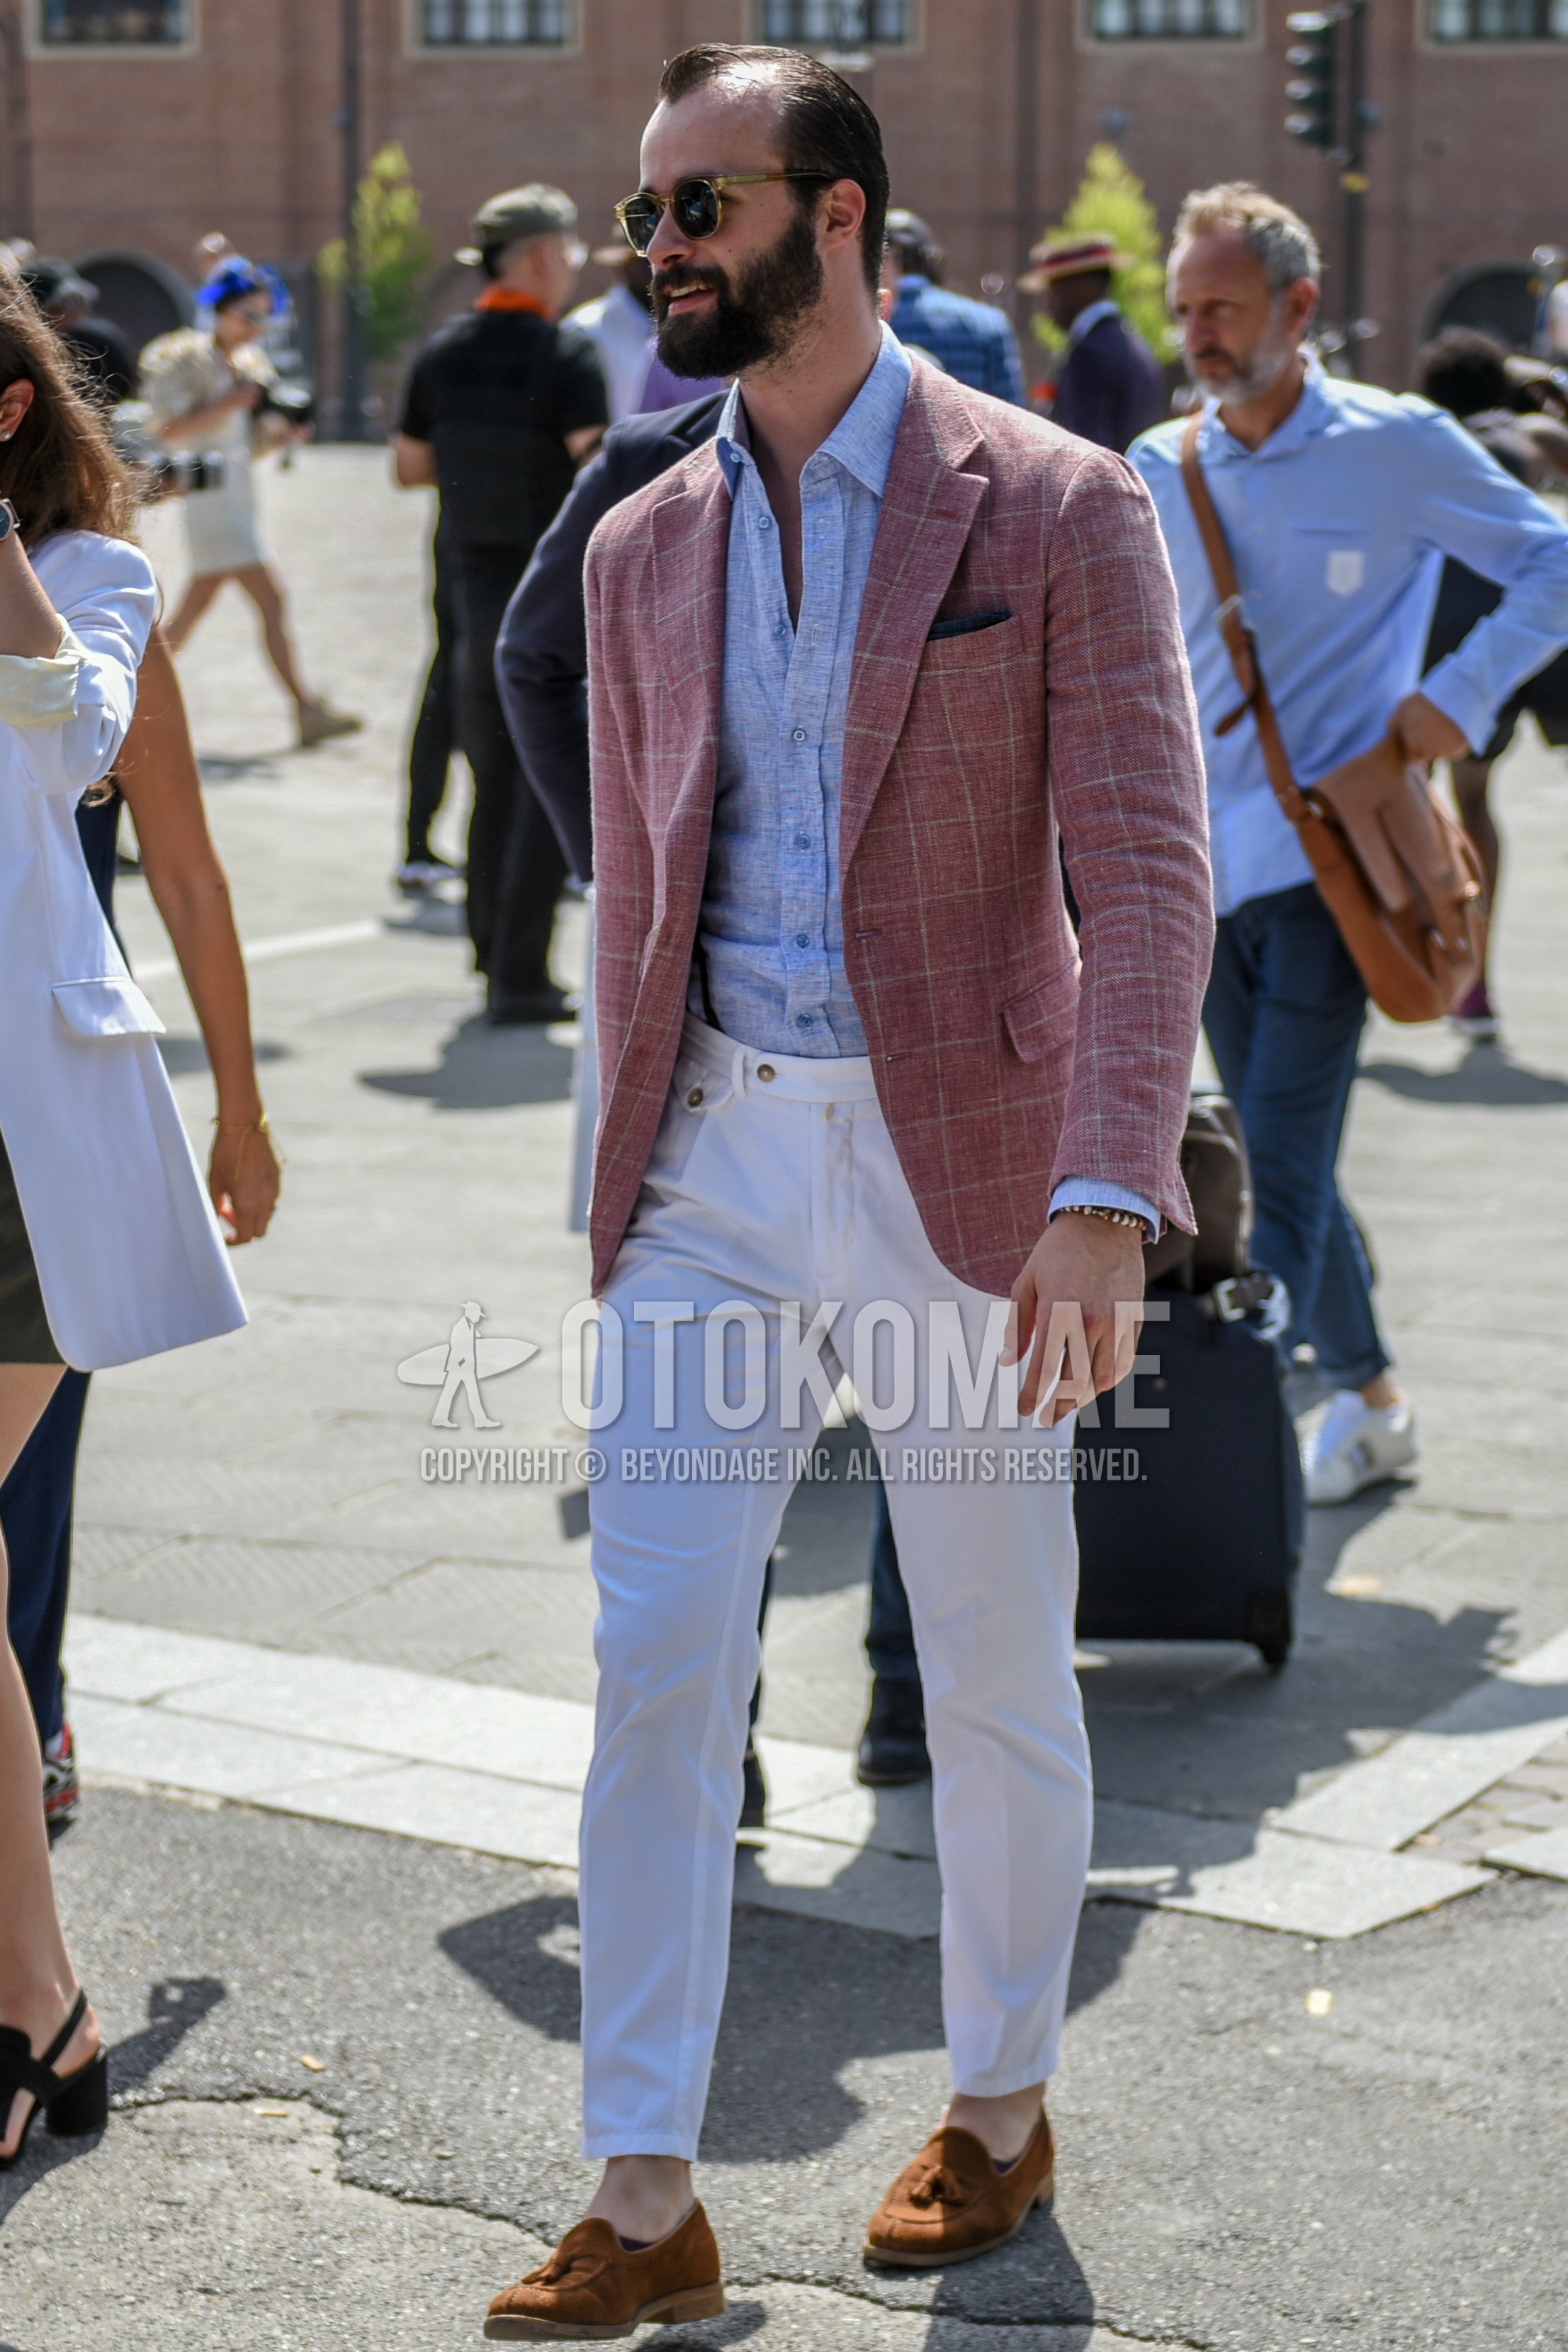 Men's spring summer outfit with brown tortoiseshell sunglasses, red check tailored jacket, light blue plain shirt, white plain cotton pants, brown tassel loafers leather shoes.